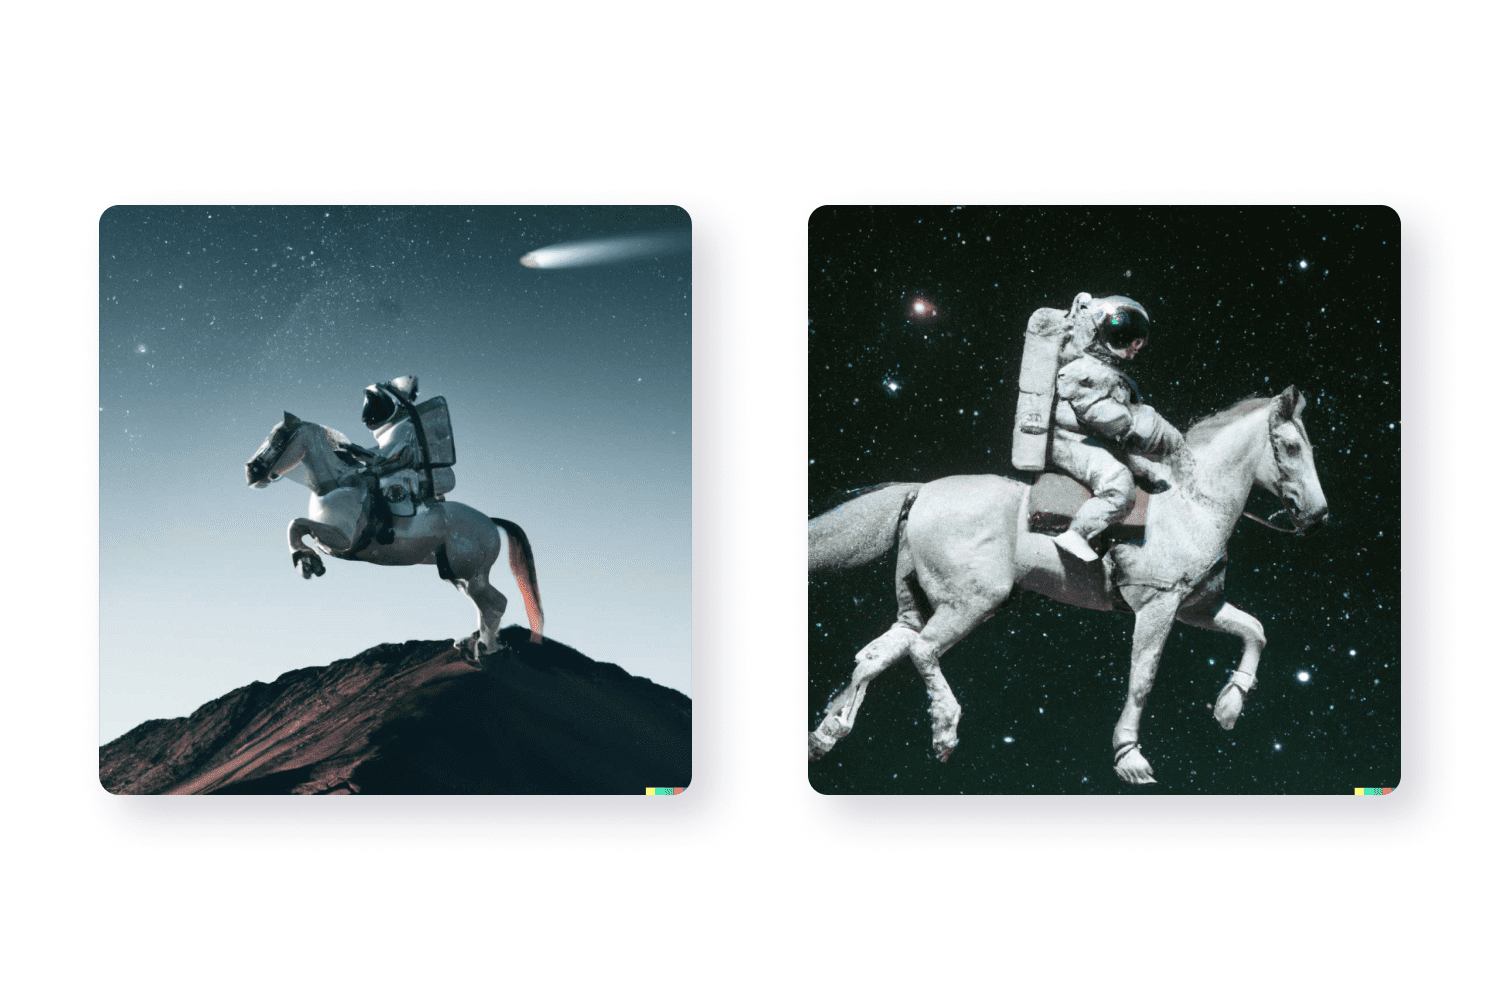 Collage with an astronaut on a horse in space.